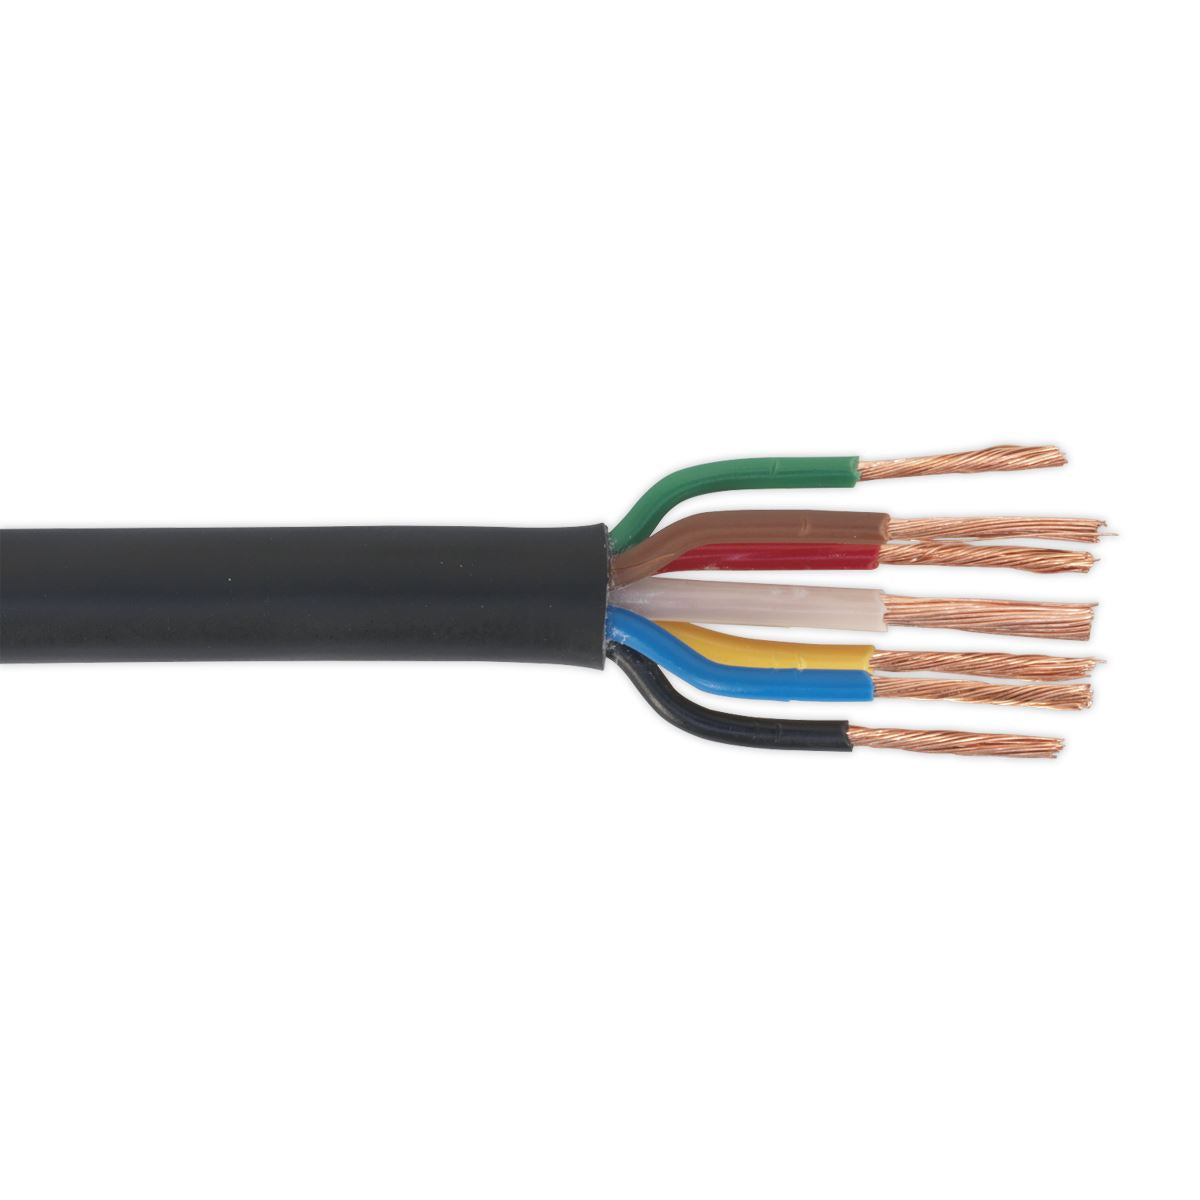 Sealey Automotive Cable Thin Wall 6 x 1mm² 32/0.20mm, 1 x 2mm² 28/0.30mm 30m Black